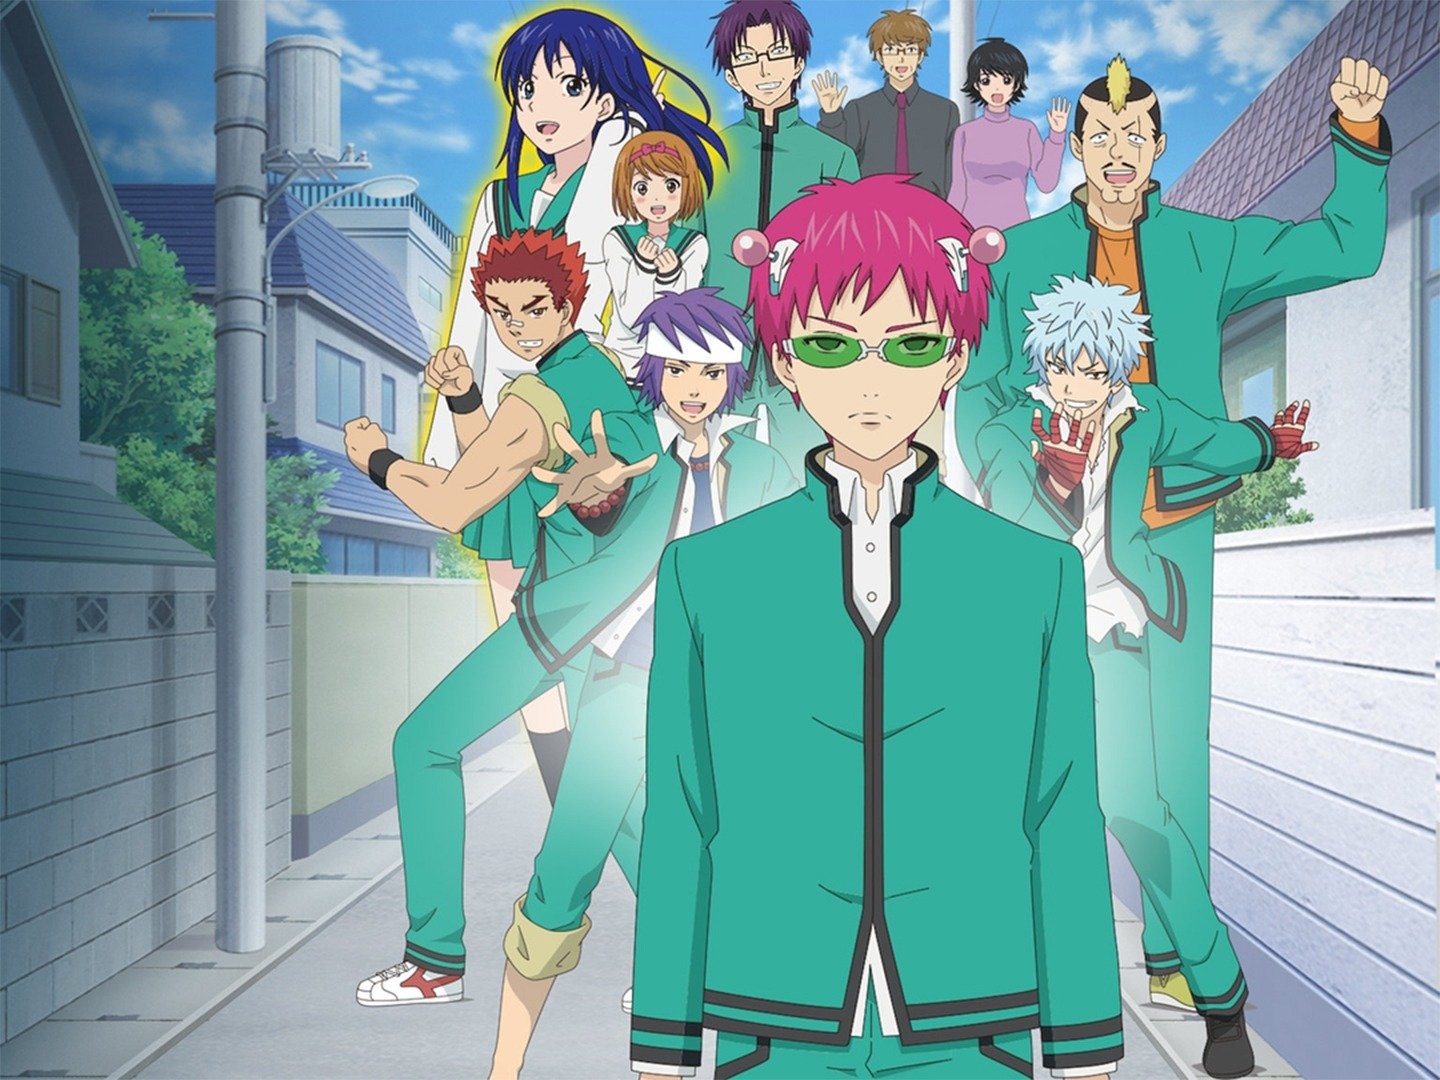 Anime The Disastrous Life of Saiki K. HD Wallpaper by HLLtJf